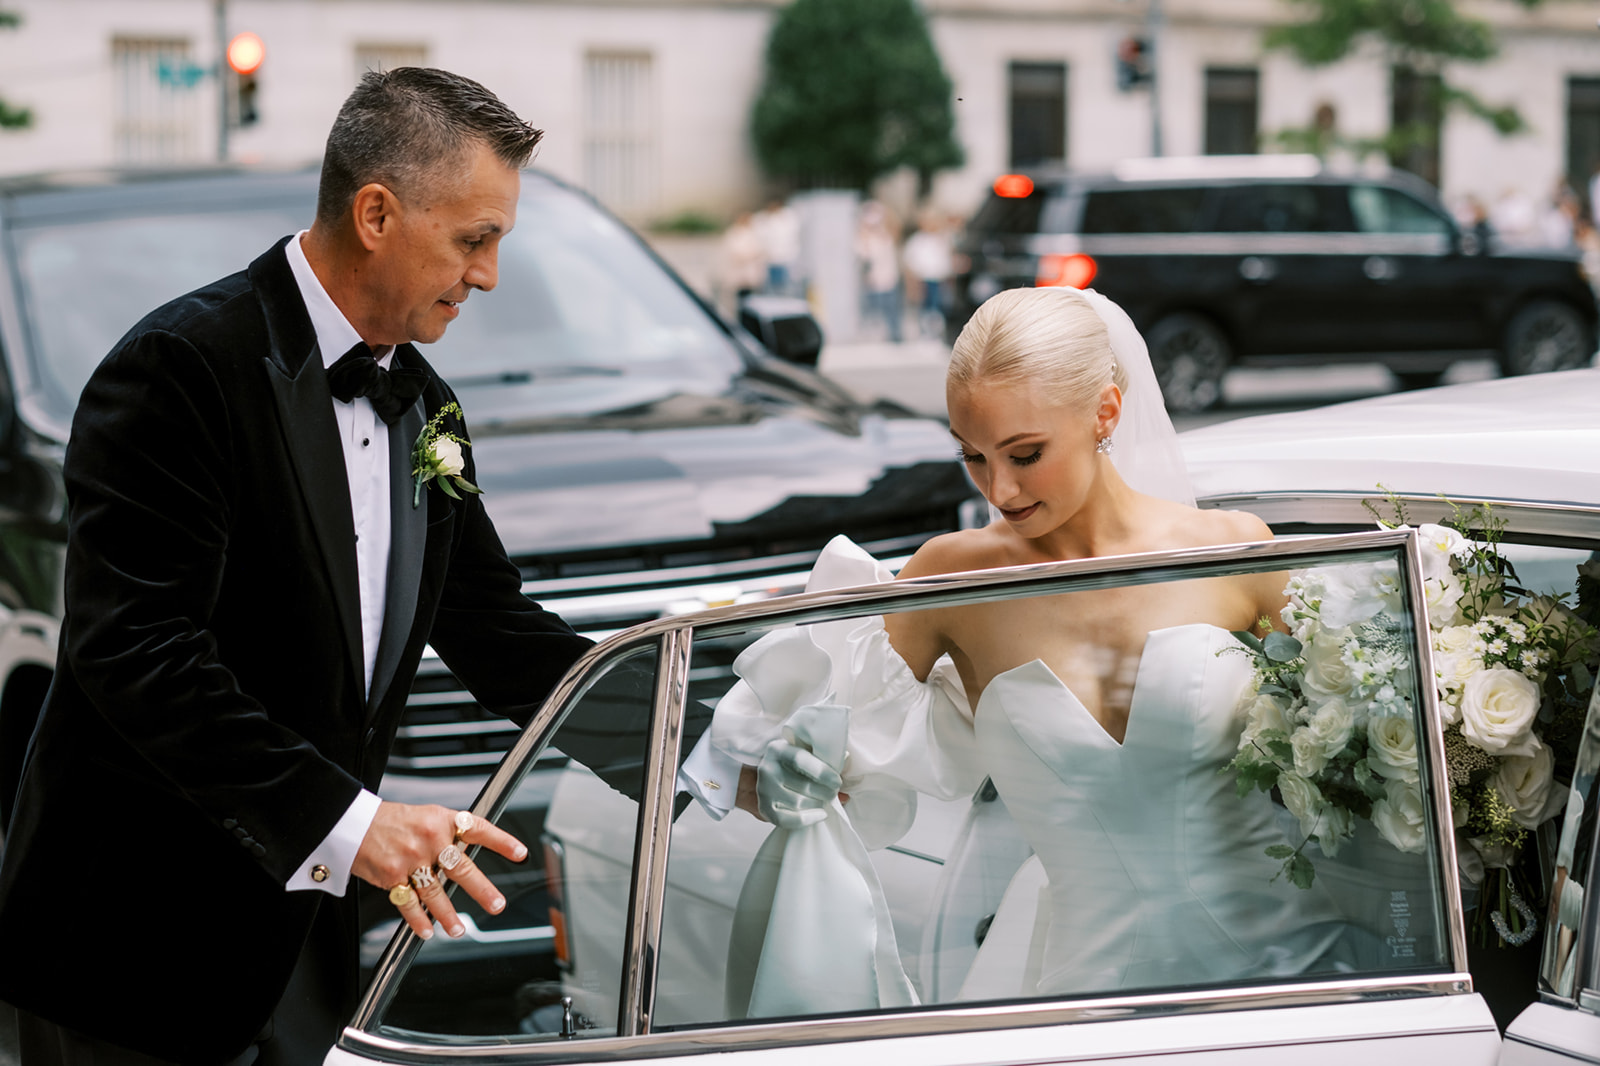 Bride's Dad helps her get into classic Rolls Royce at Hotel Washington